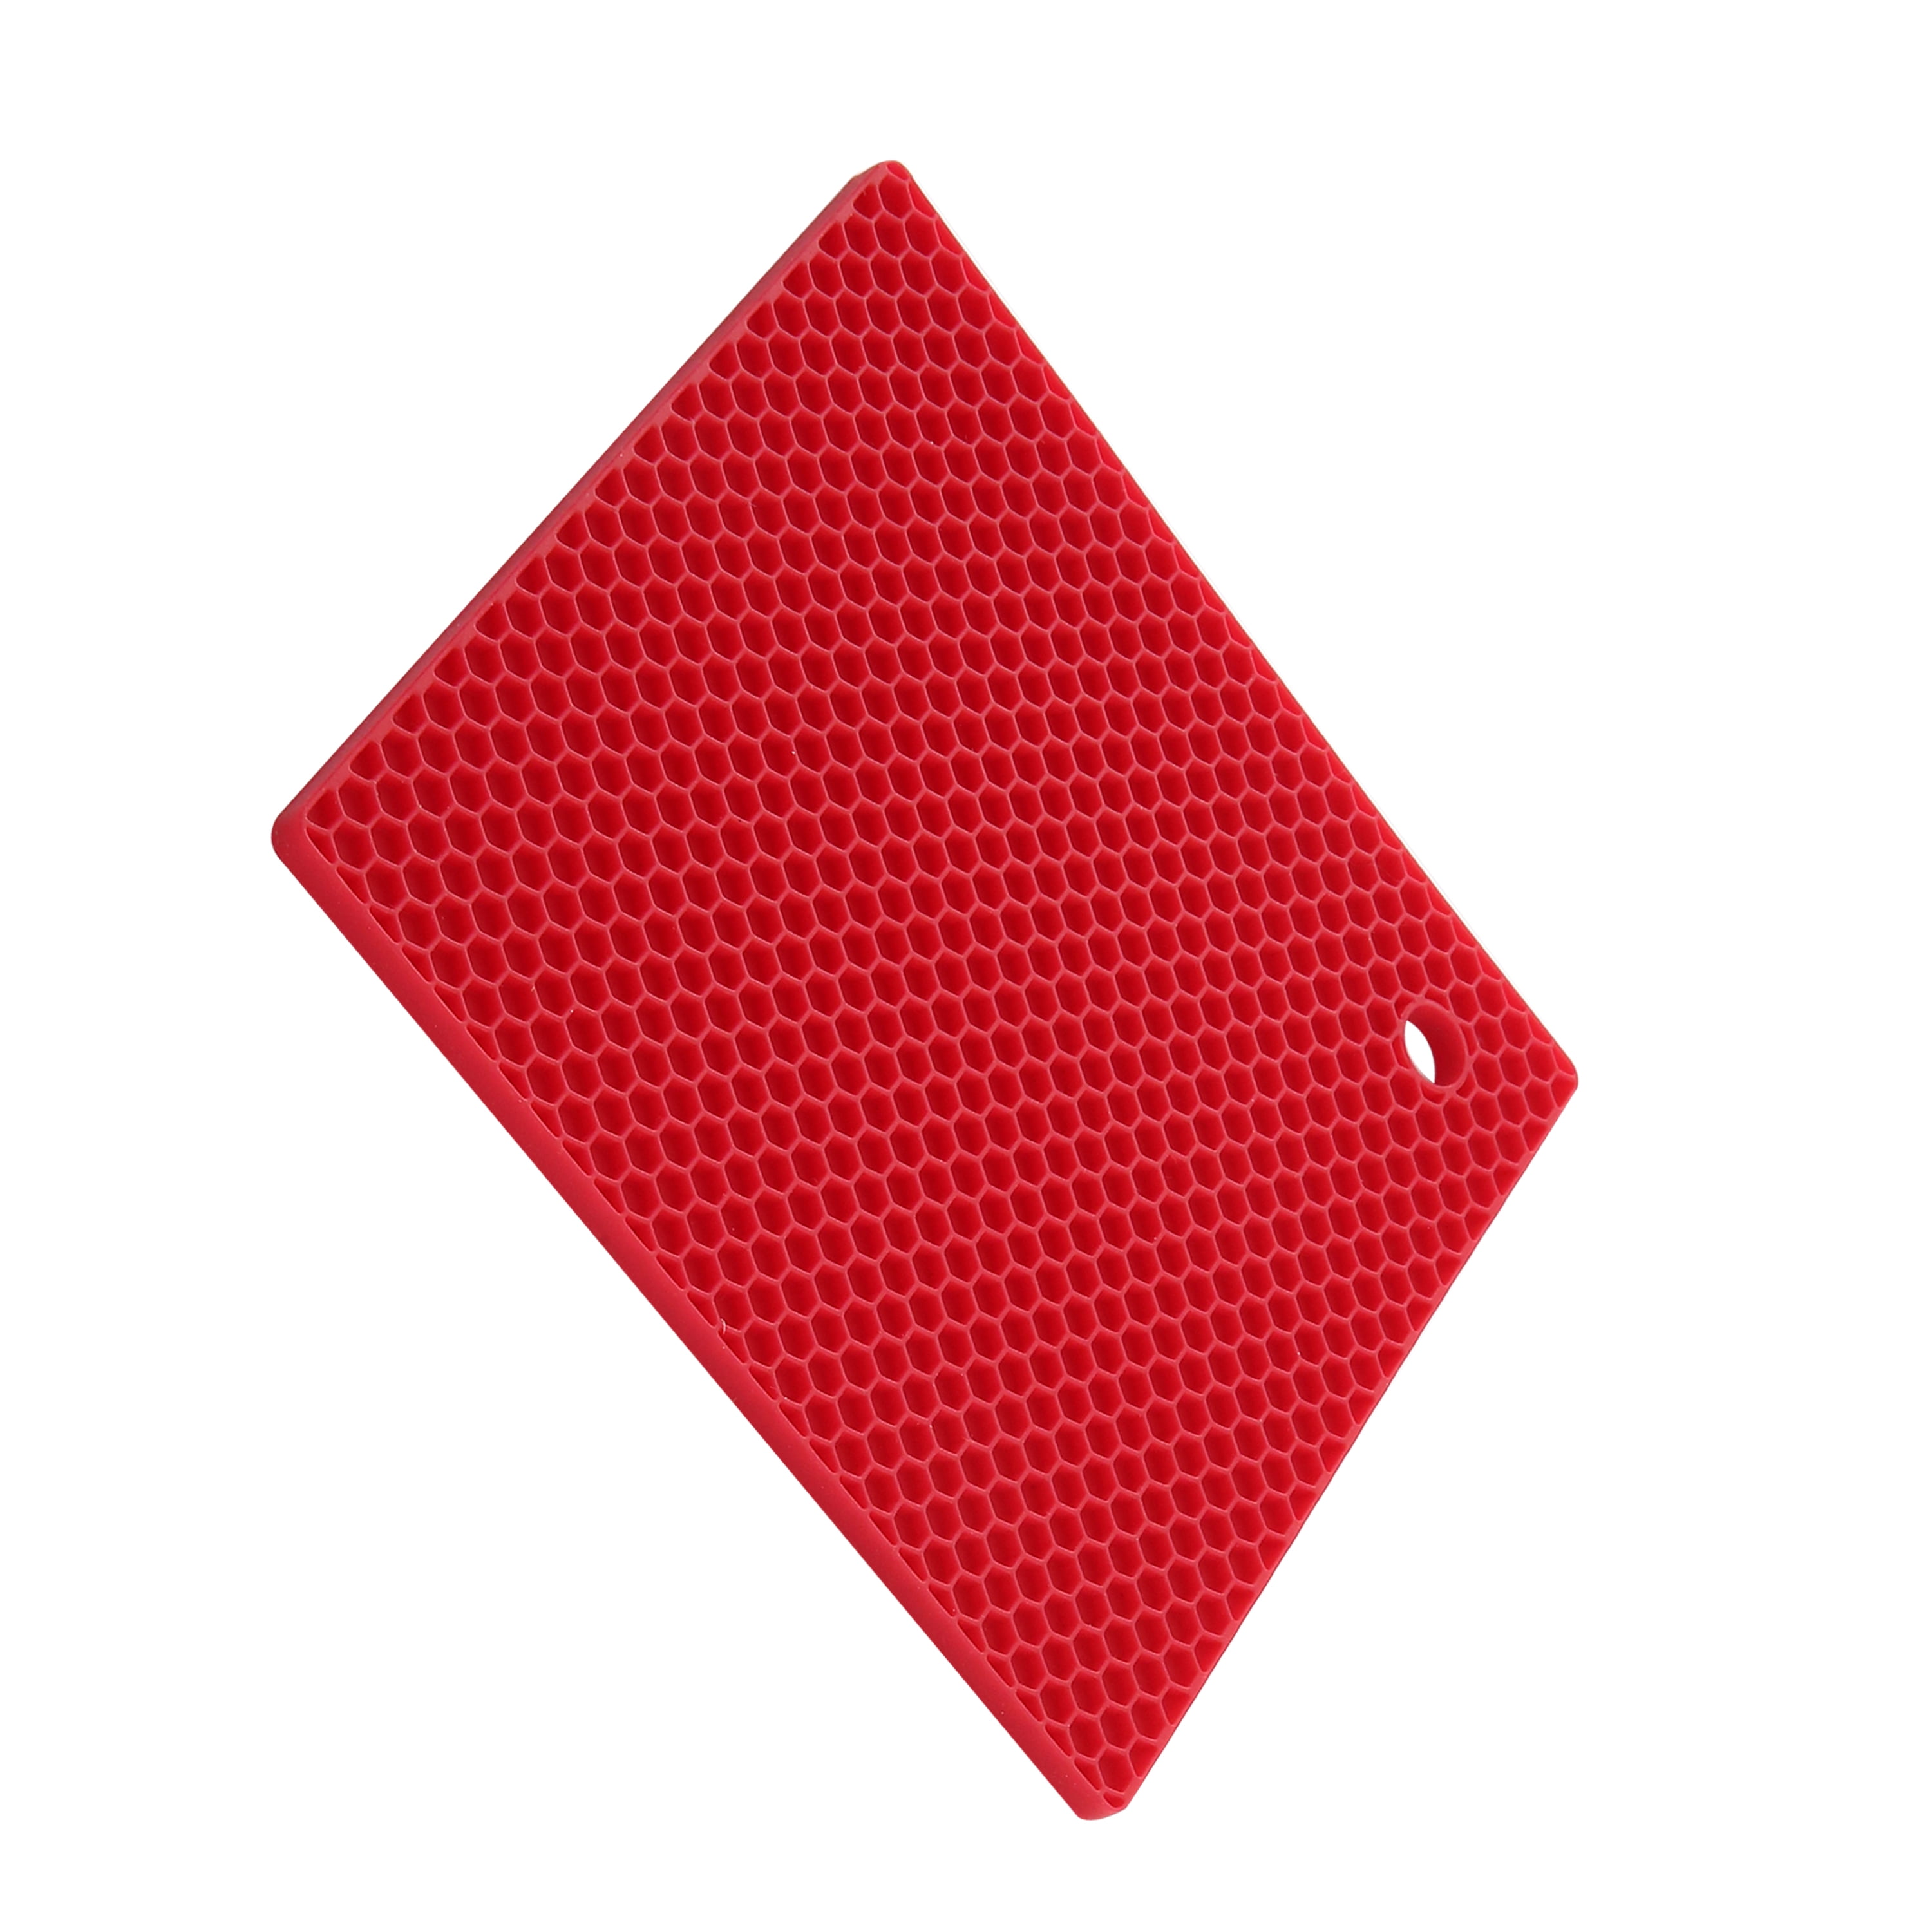 Lodge Round Deluxe Silicone Trivet - Red